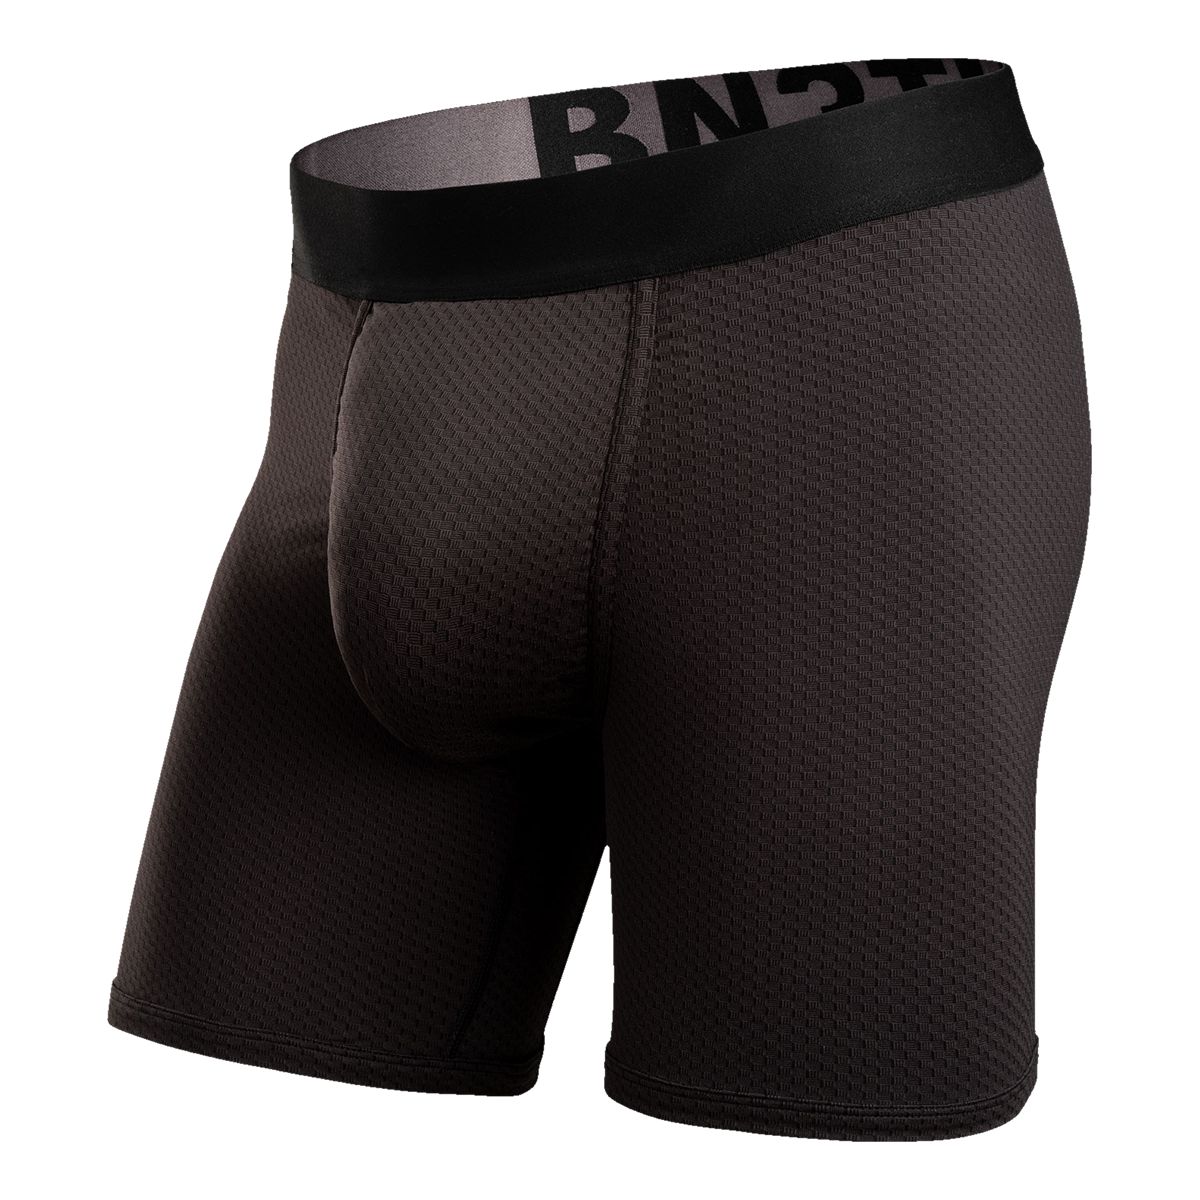 https://media-www.sportchek.ca/product/div-03-softgoods/dpt-79-clothing-accessories/sdpt-01-mens/334183320/bn3th-move-entourage-men-s-boxer-brief-underwear-breathable-slim-fit-1880defe-ffaa-466f-bf5a-00848fd1be06-jpgrendition.jpg?imdensity=1&imwidth=1244&impolicy=mZoom